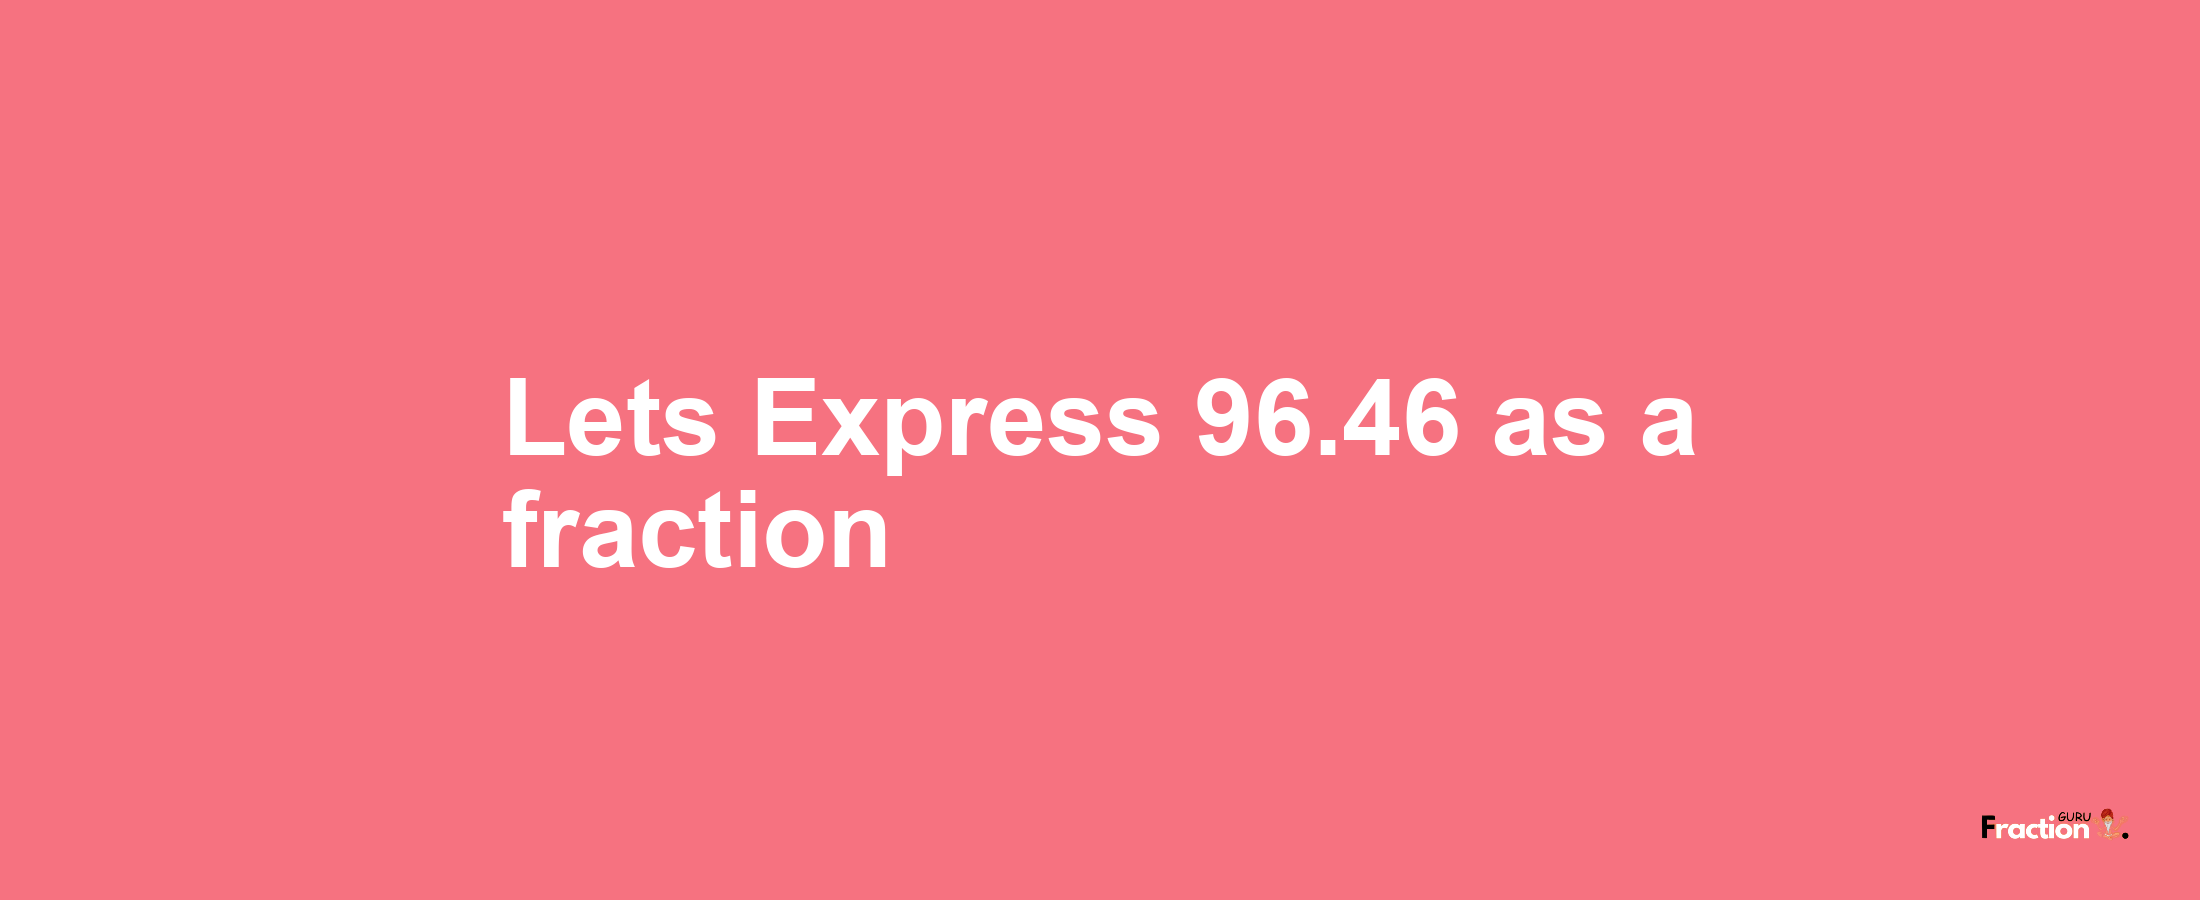 Lets Express 96.46 as afraction